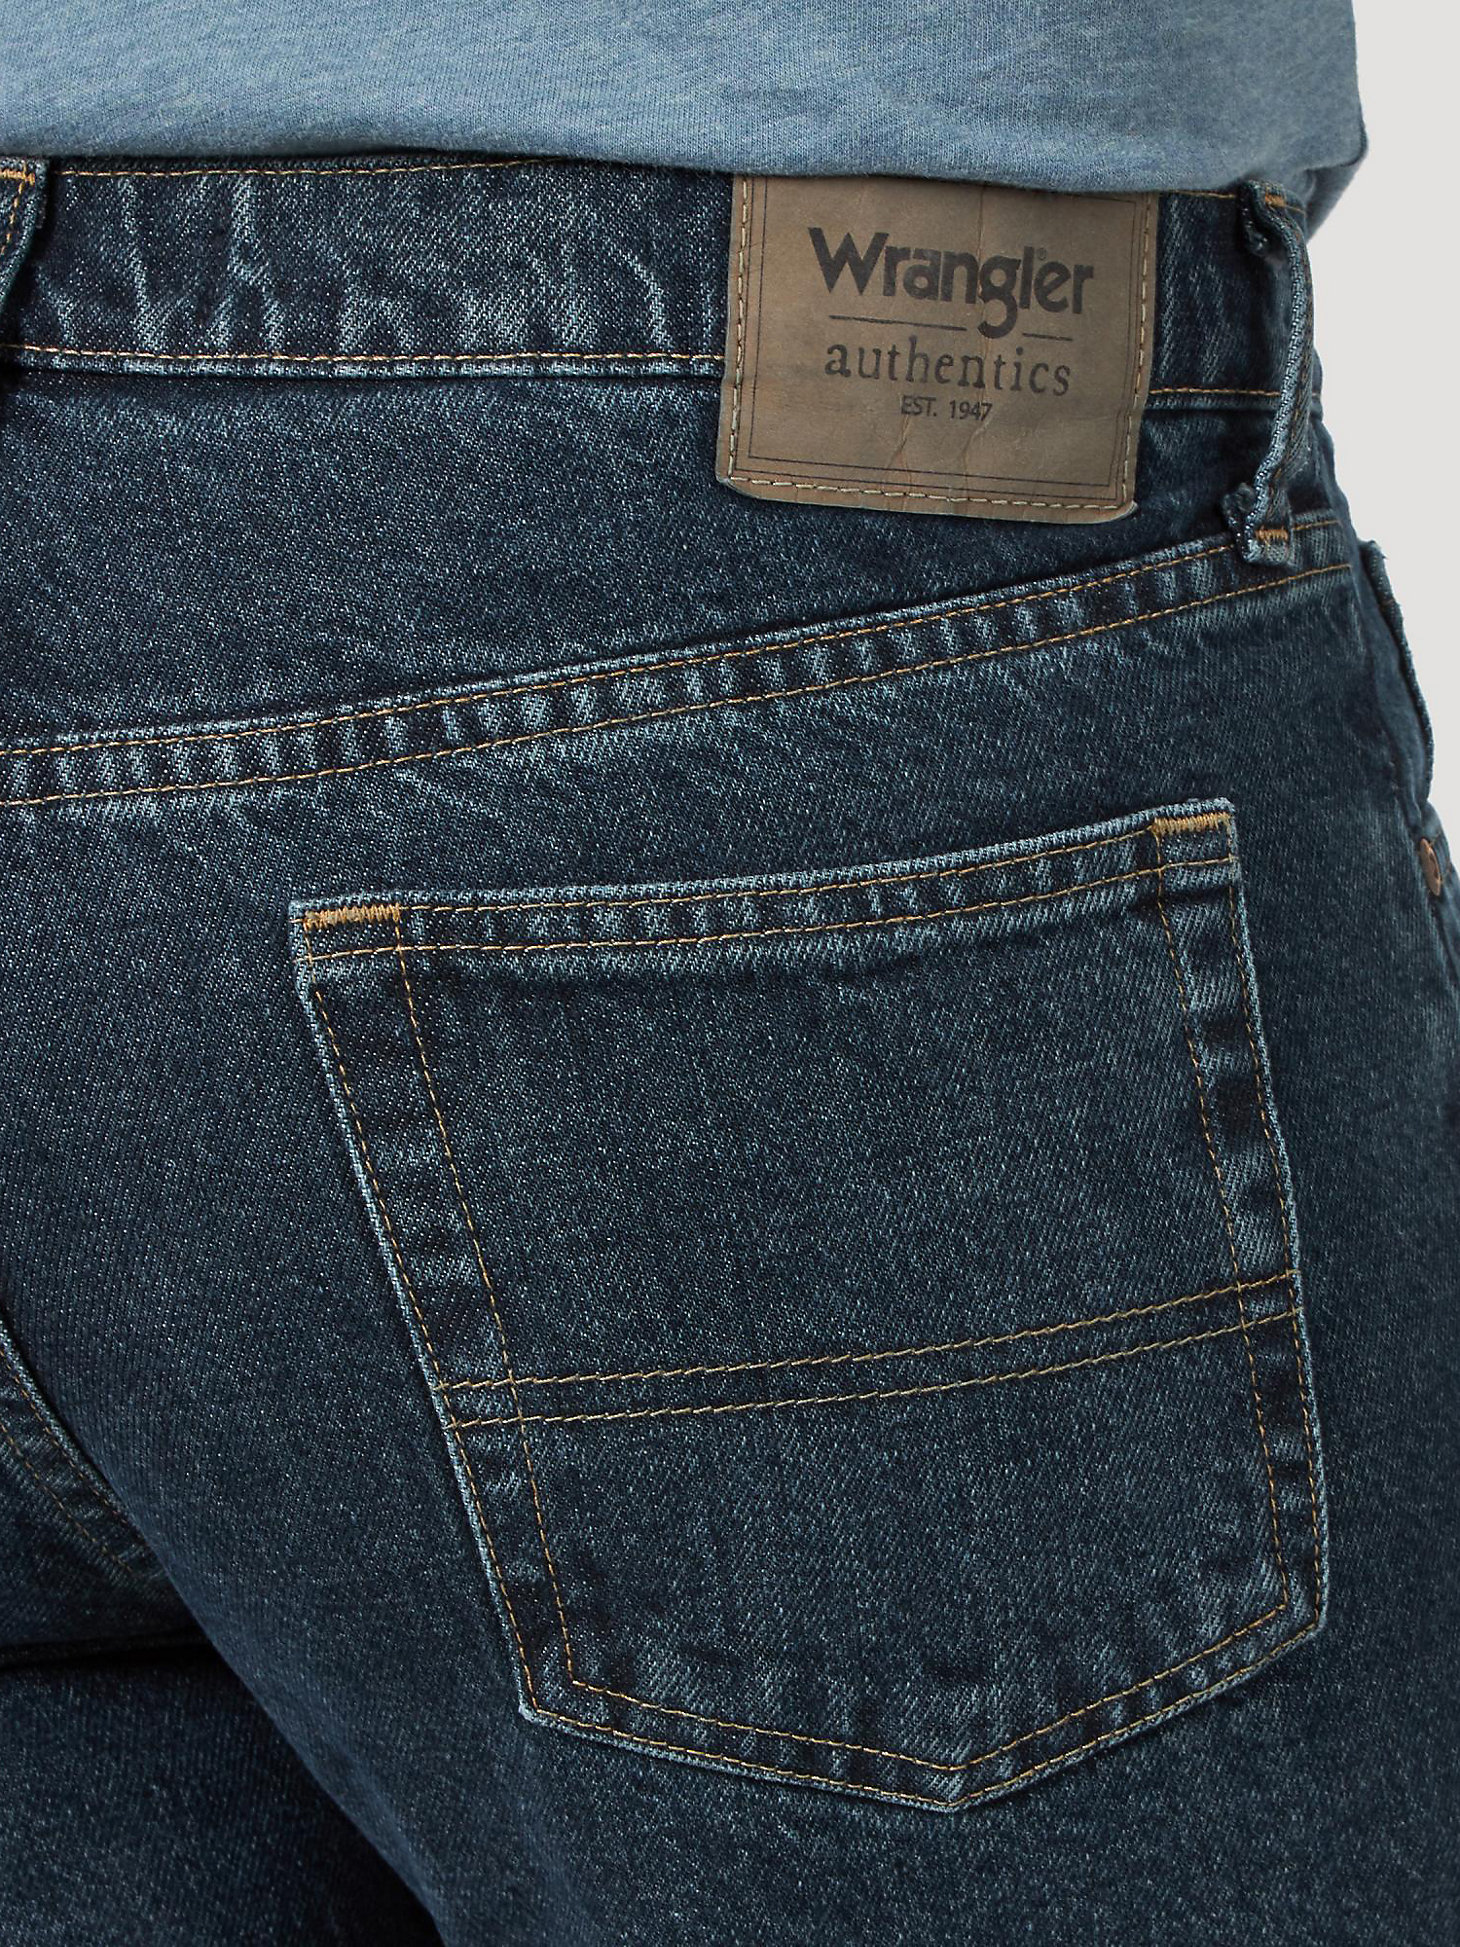 Men's Wrangler Authentics® Relaxed Fit Cotton Jean in Storm alternative view 3